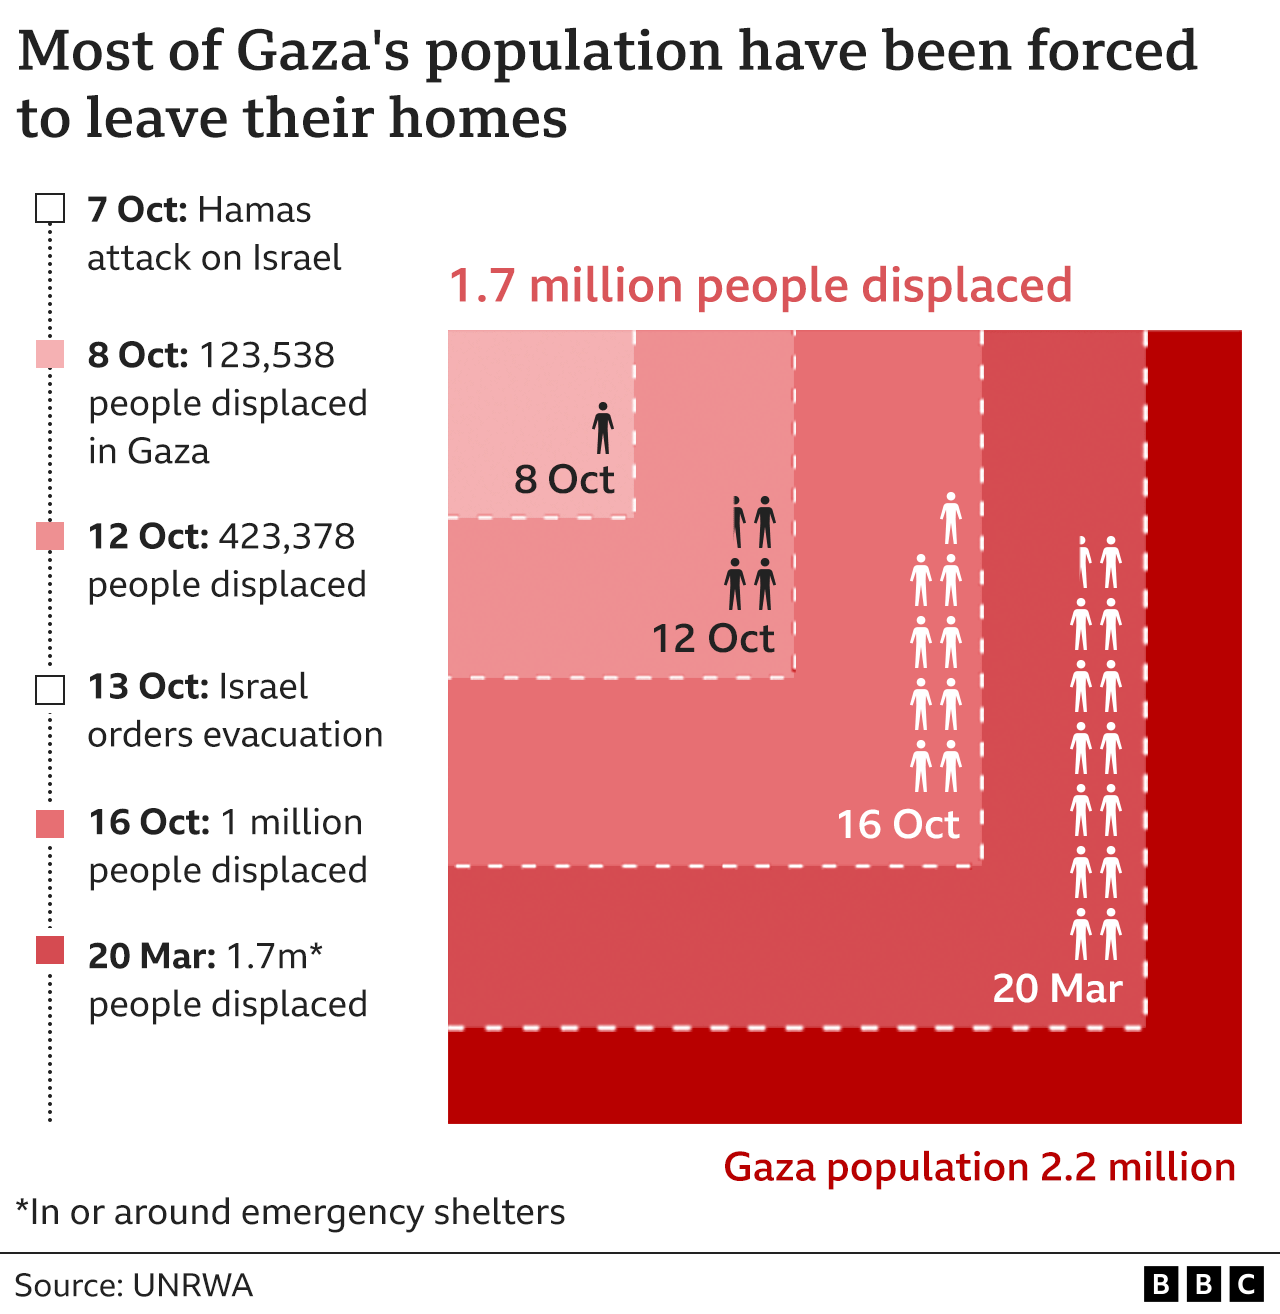 Number of displaced people in Gaza since 7 October has reached 1.7m